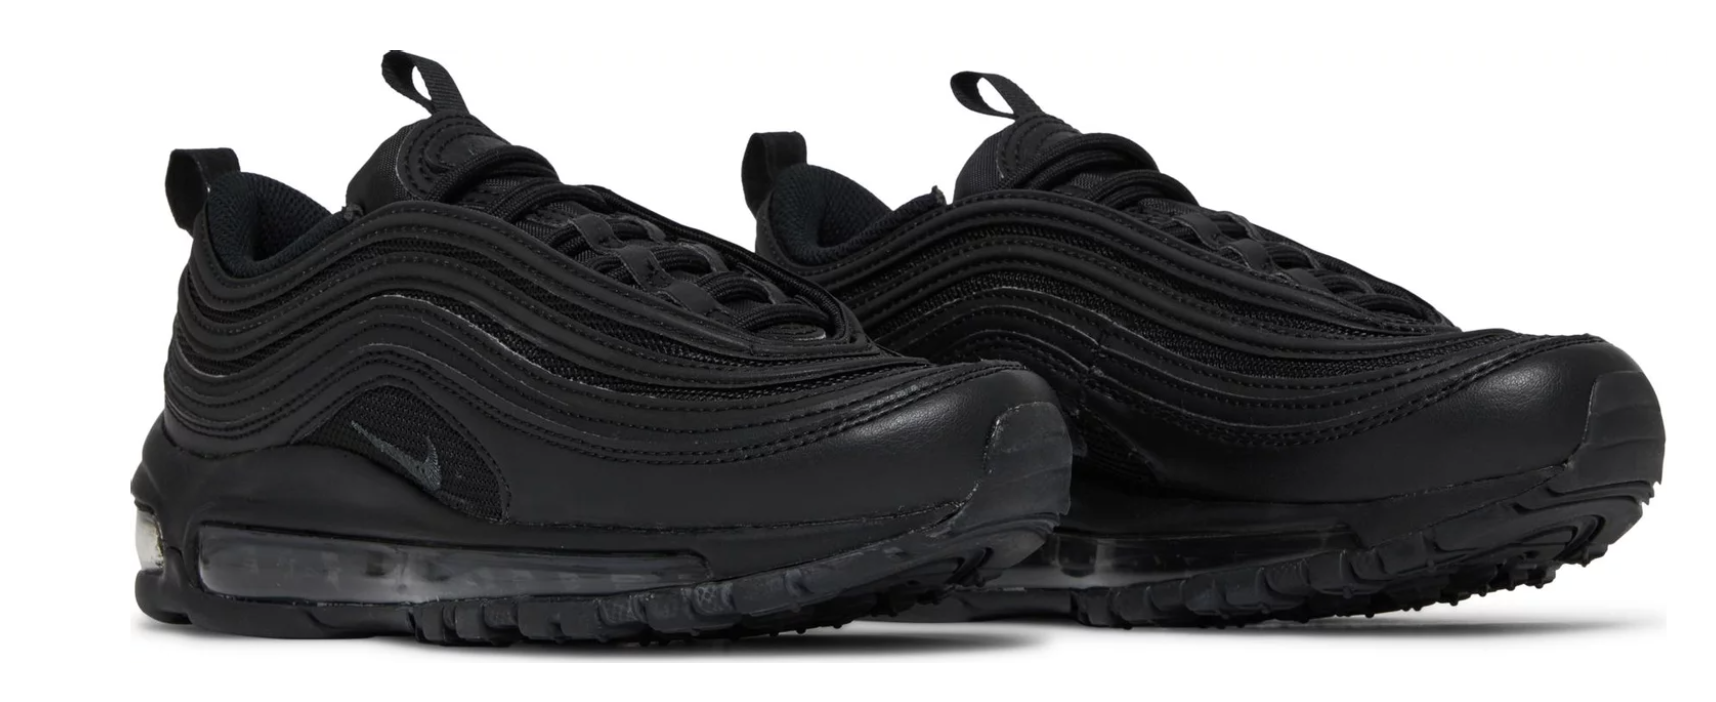 Nike Women's Air Max 97 Running Shoes - Sneakermaniany